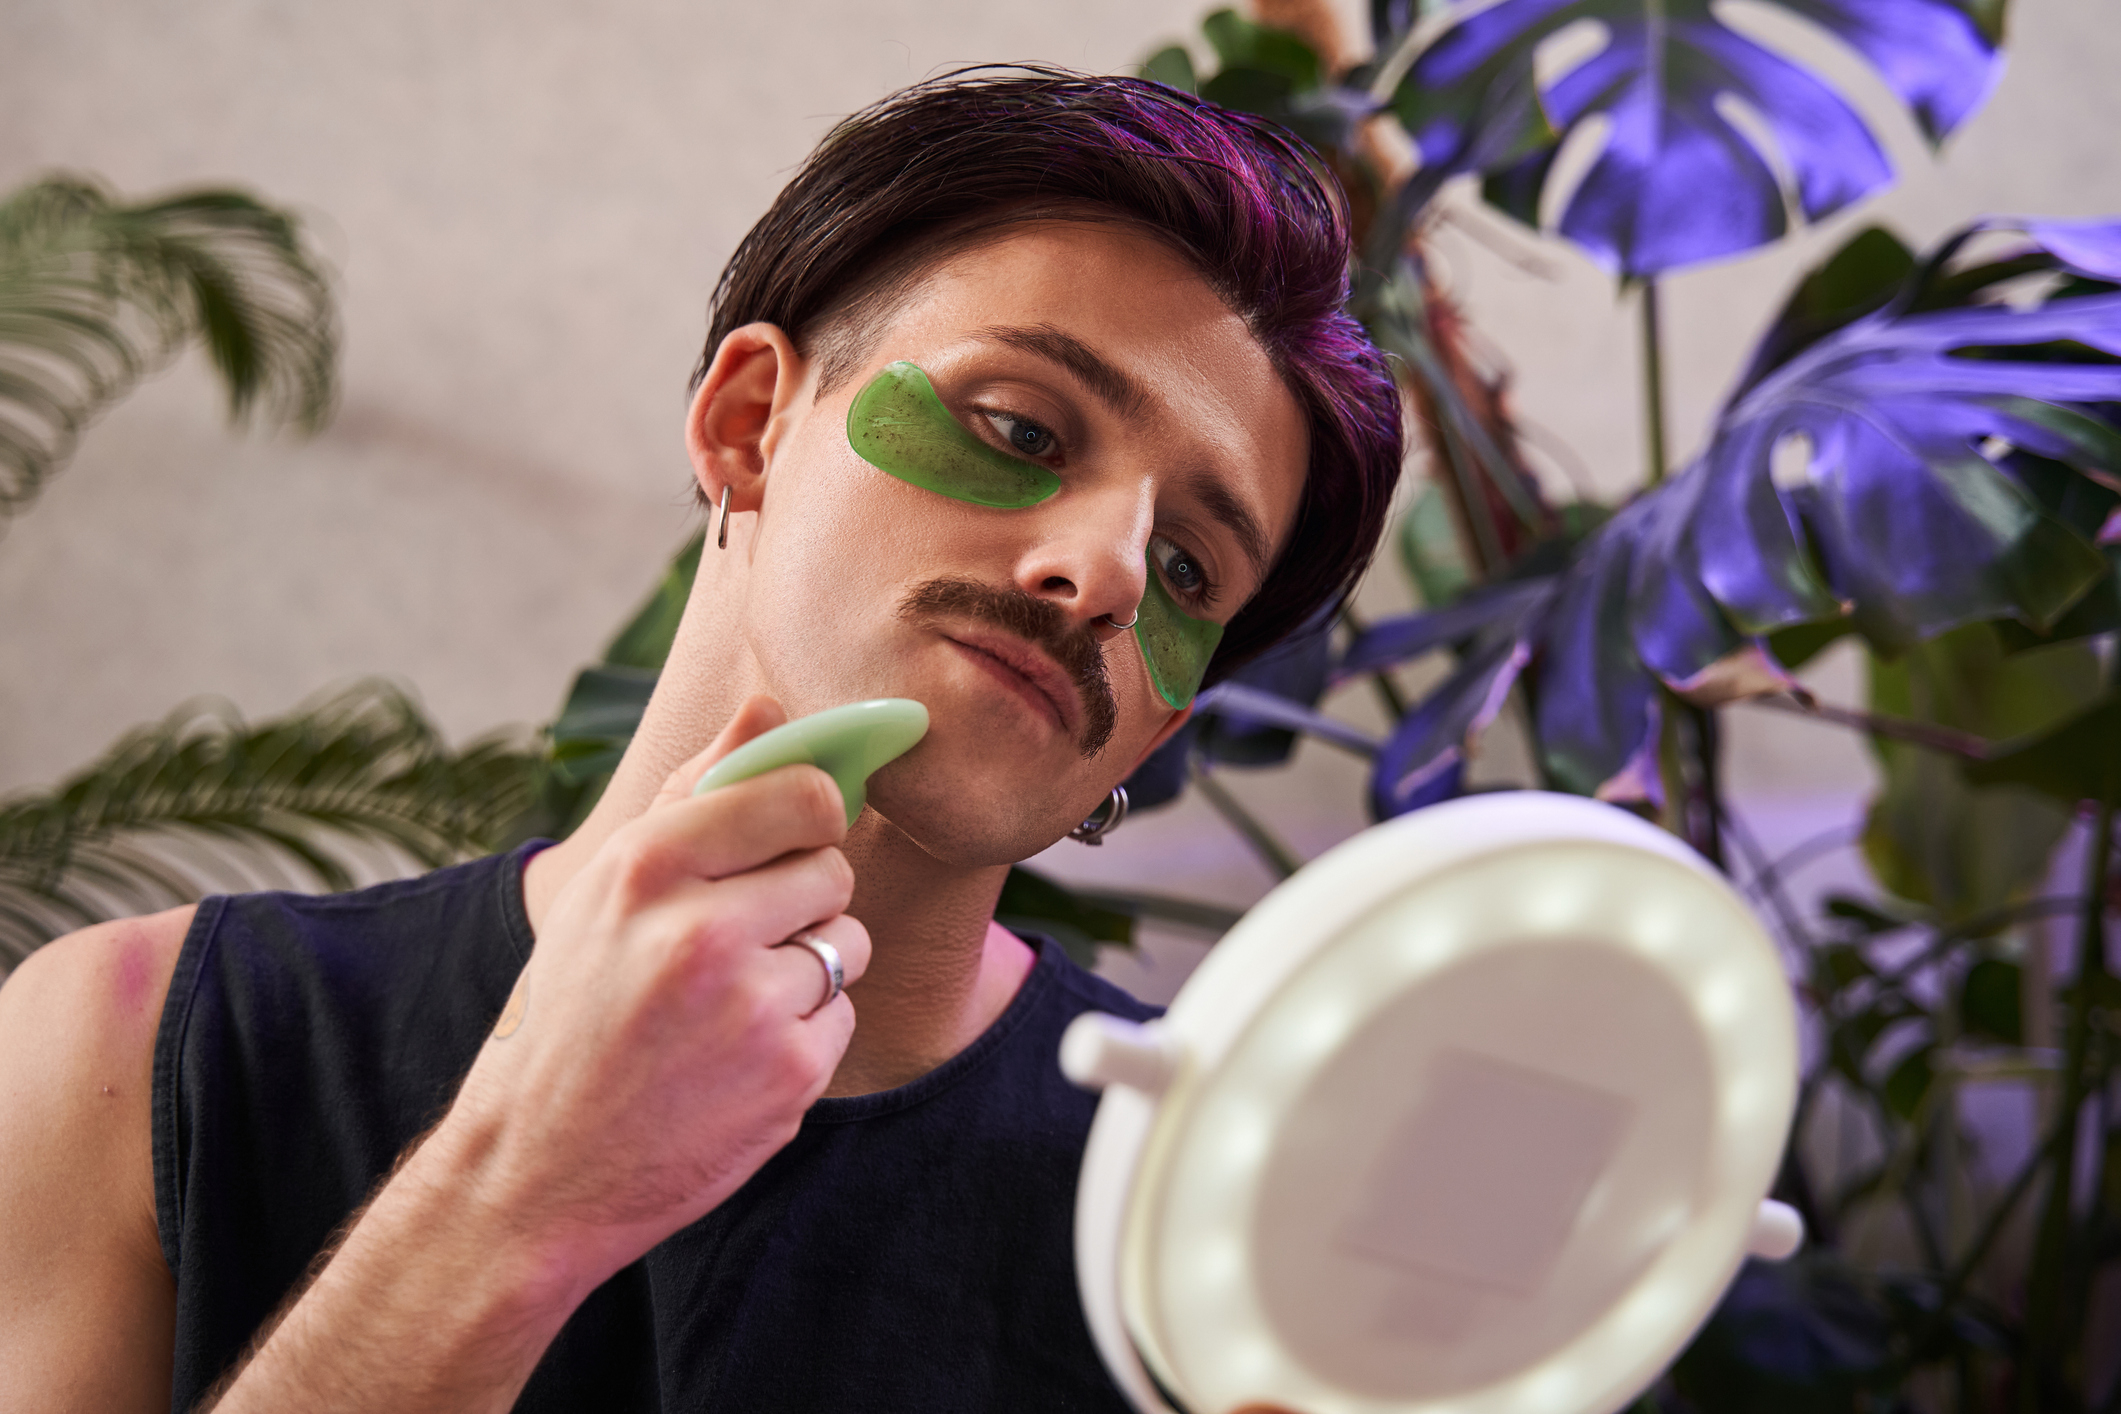 A person using gua sha tools on their face